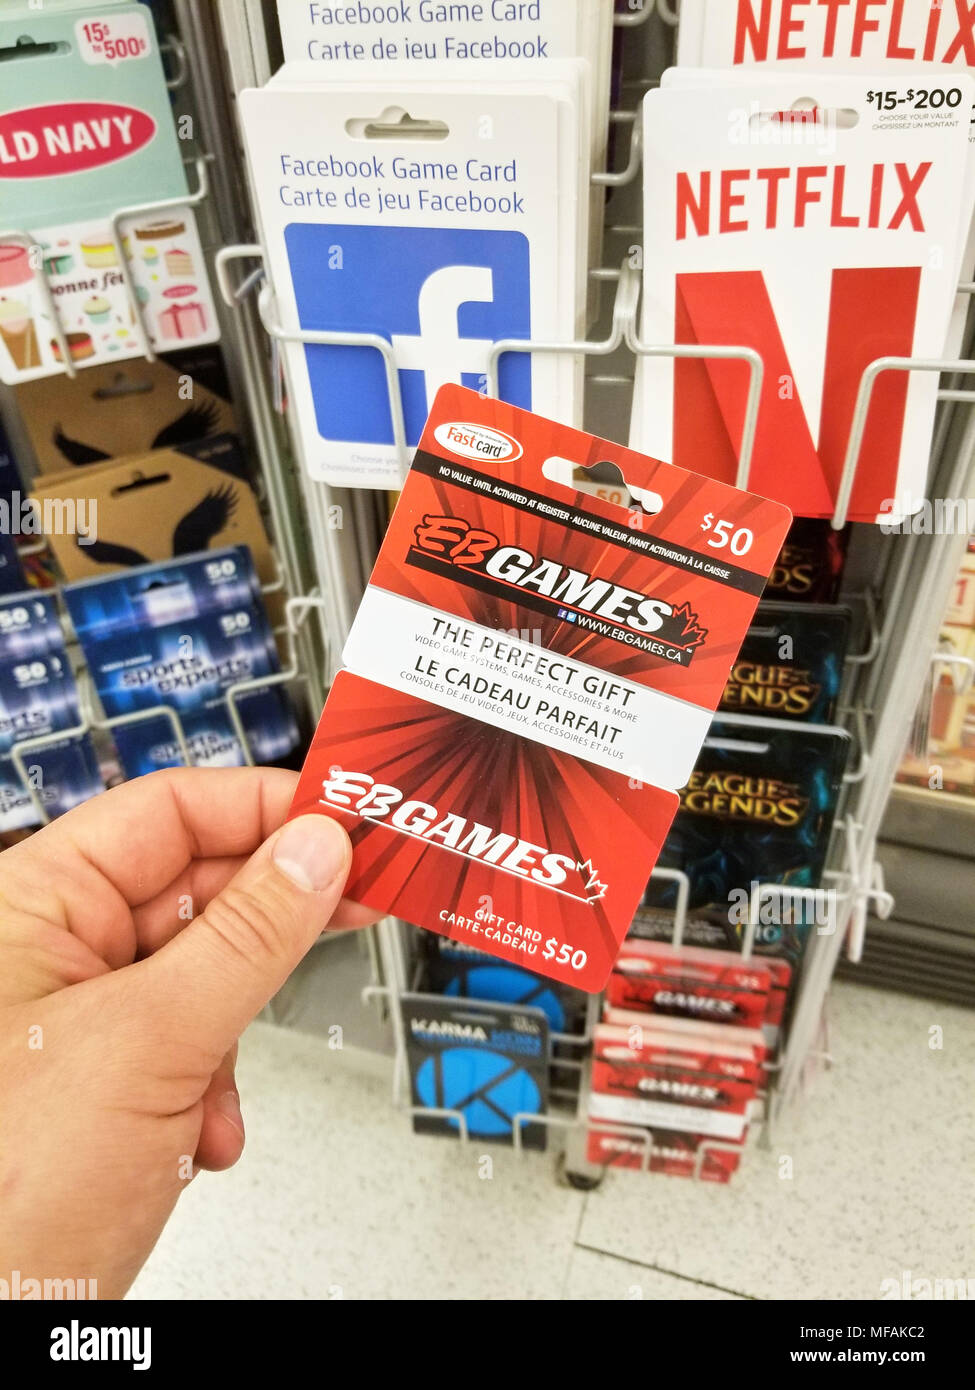 Eb games photography and images - Alamy